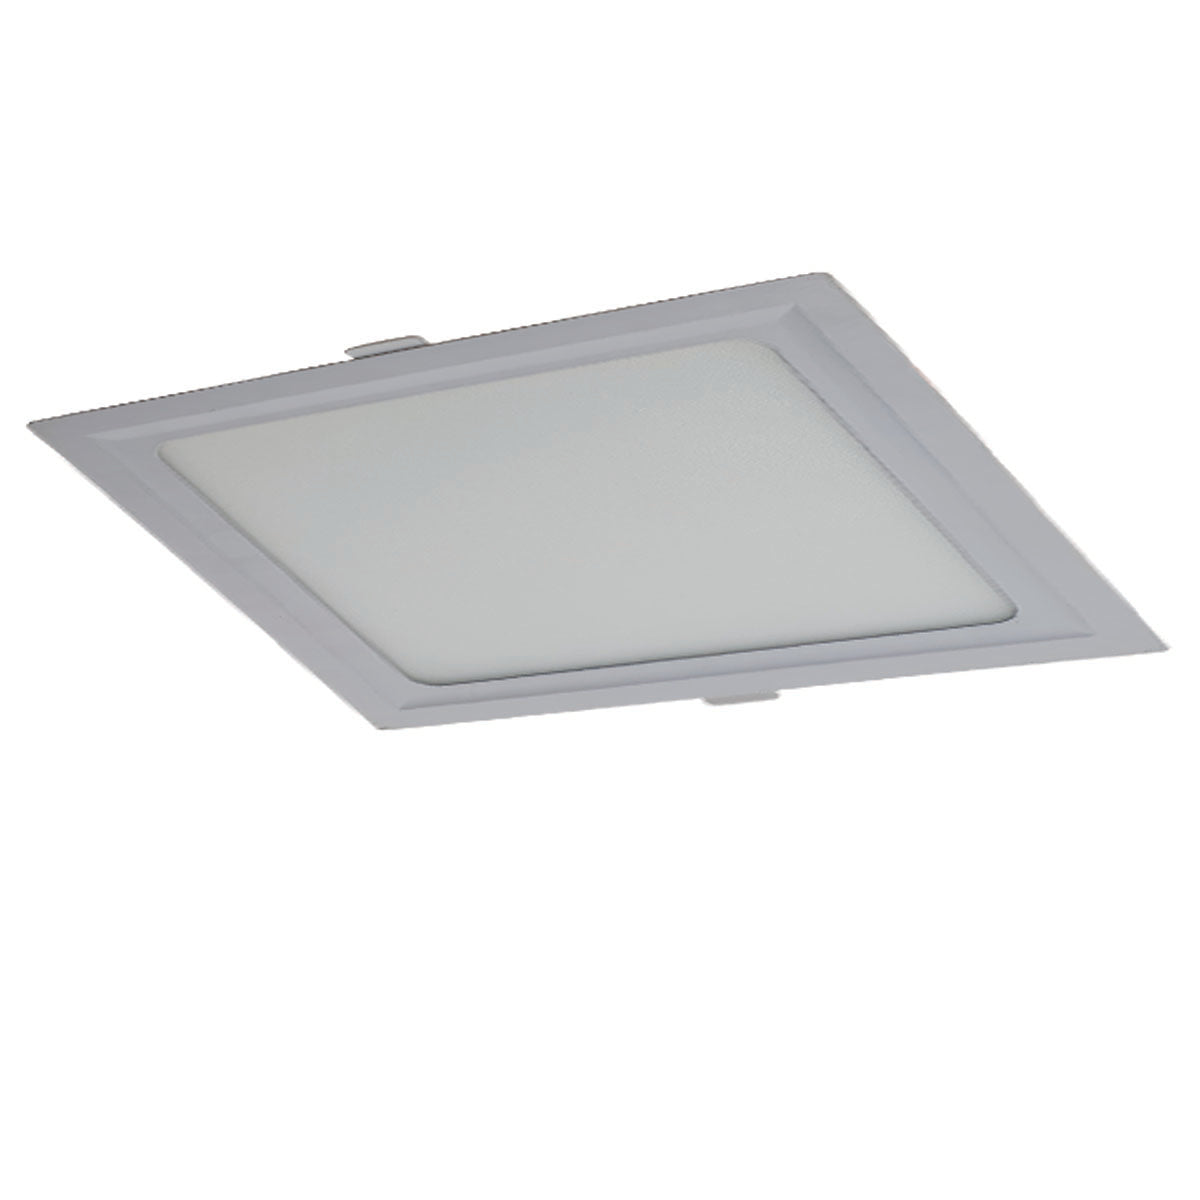 15W LED Recessed Square Panel Light Ceiling Down Light for Modern Residence Bright - Shop for LED lights - Transformers - Lampshades - Holders | LEDSone UK